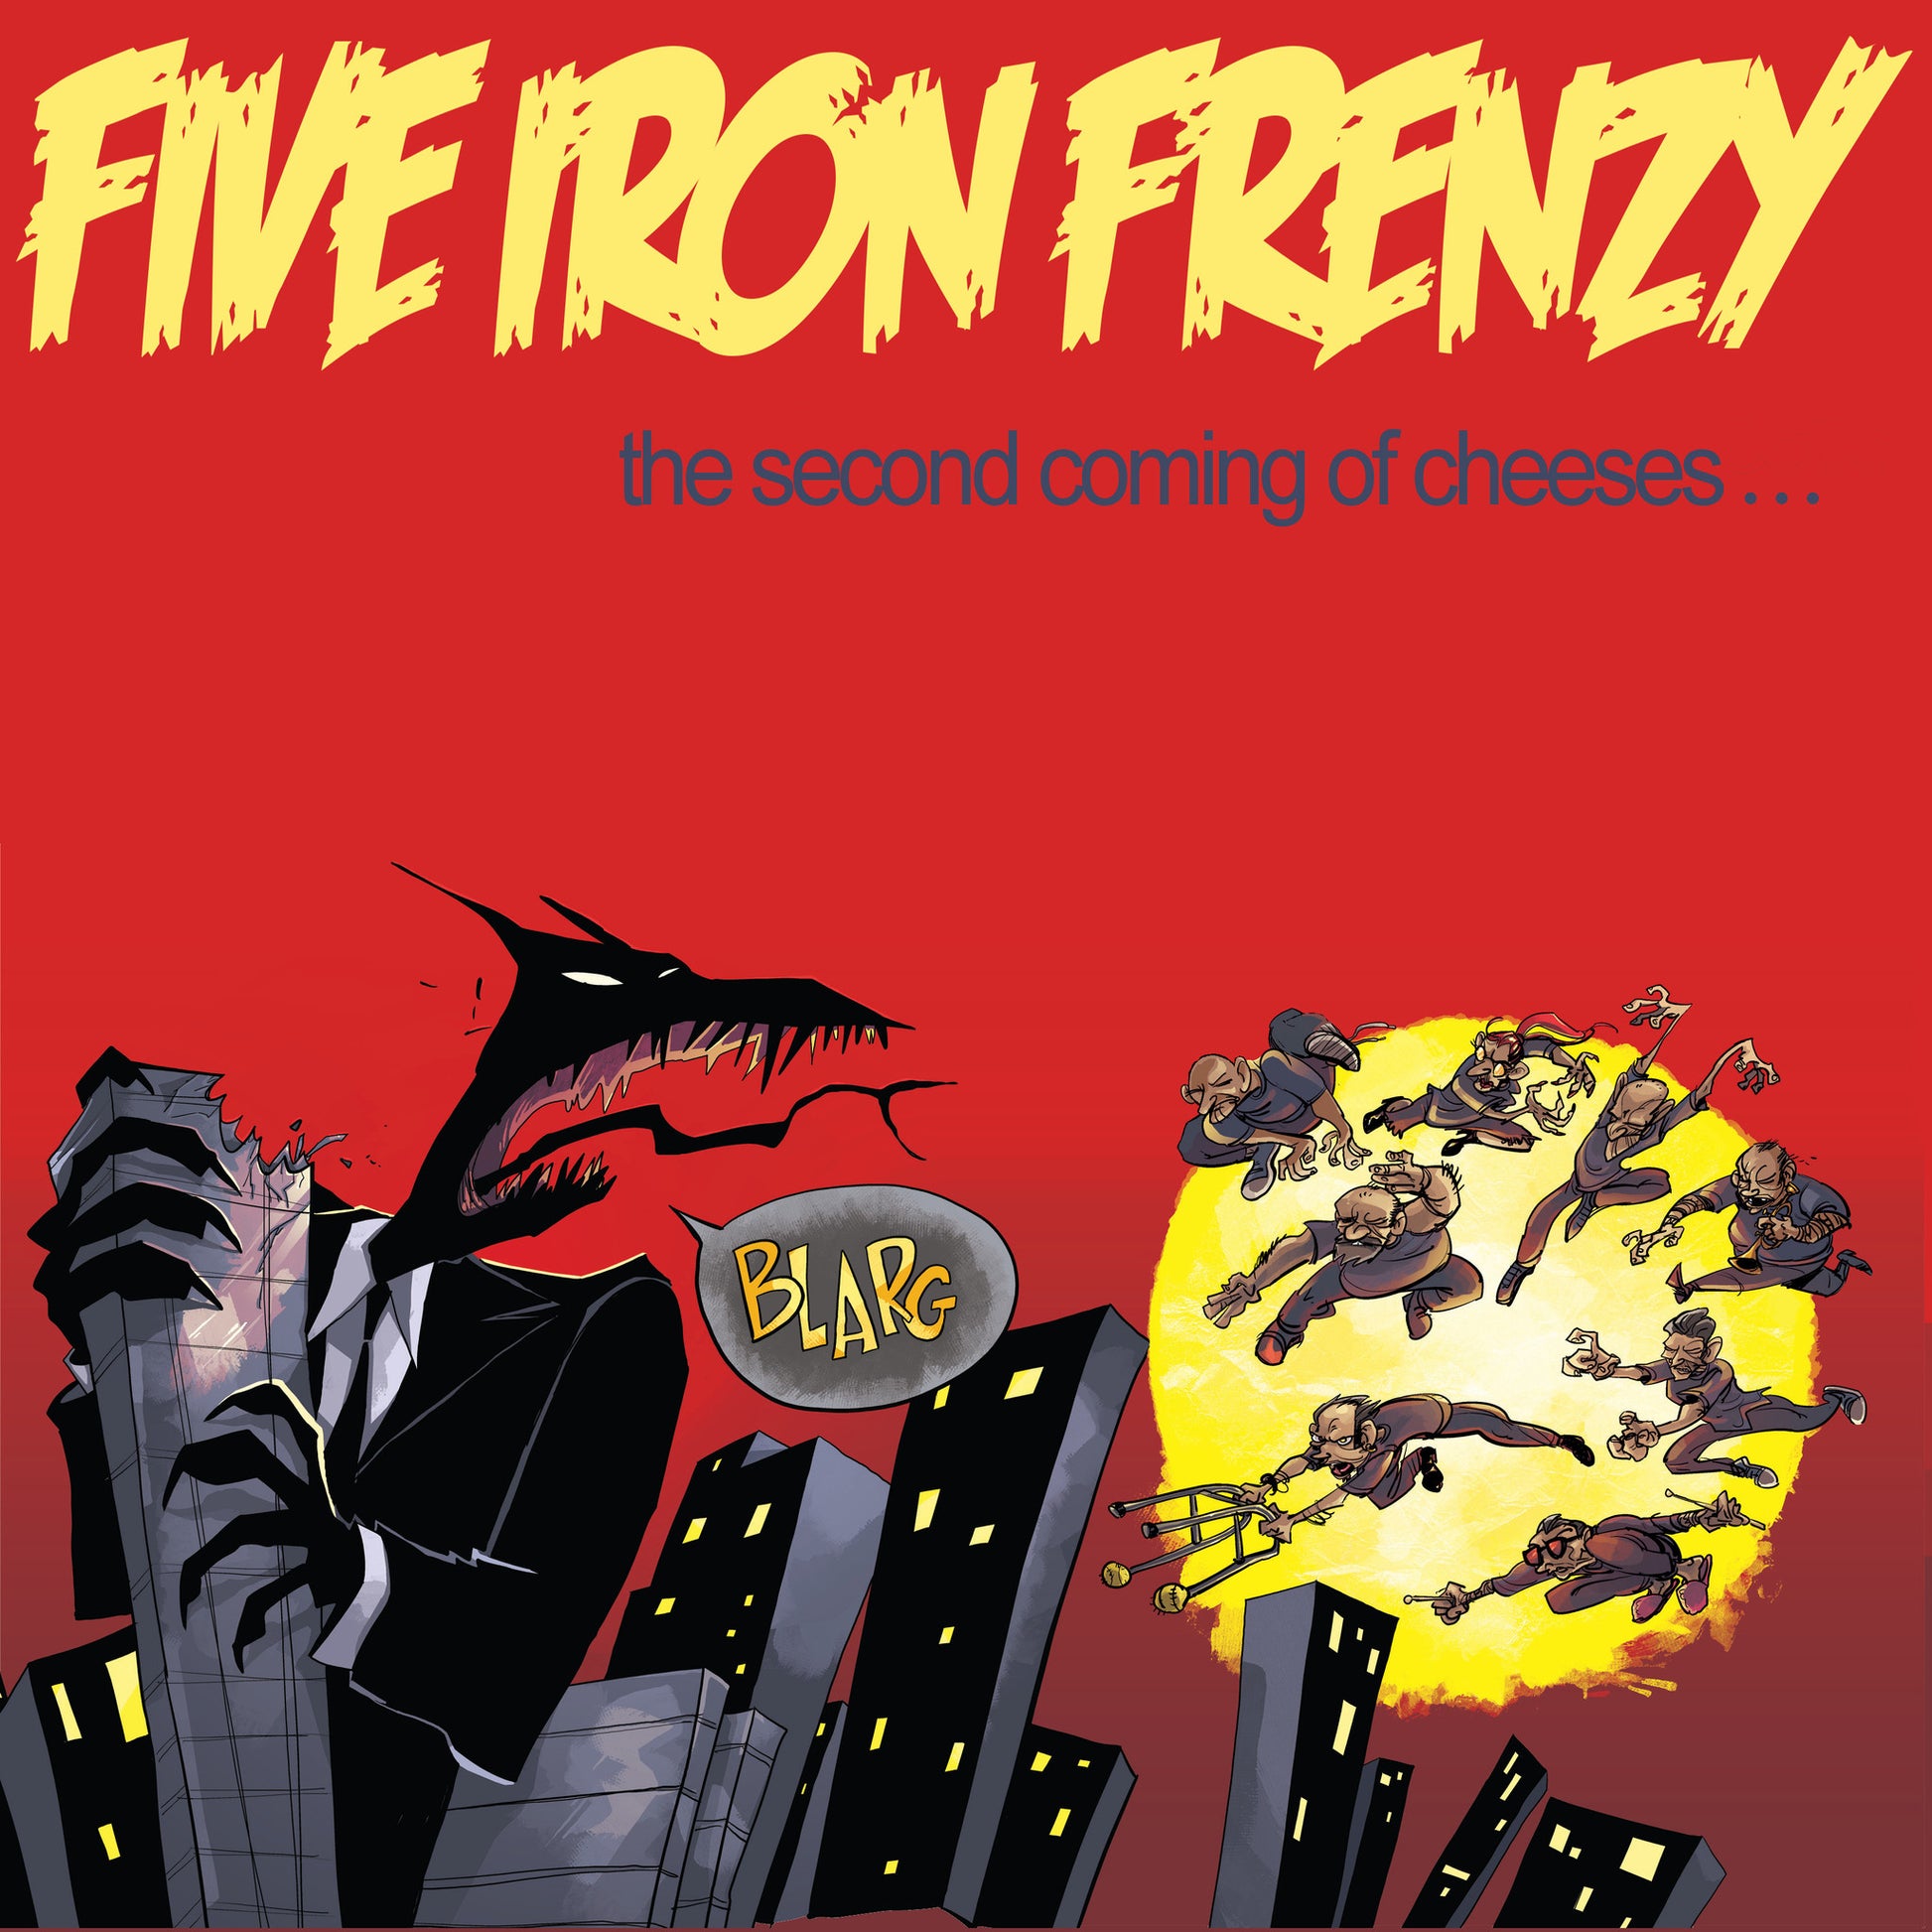 The Second Coming of Cheeses... by Five Iron Frenzy (Cover Art)